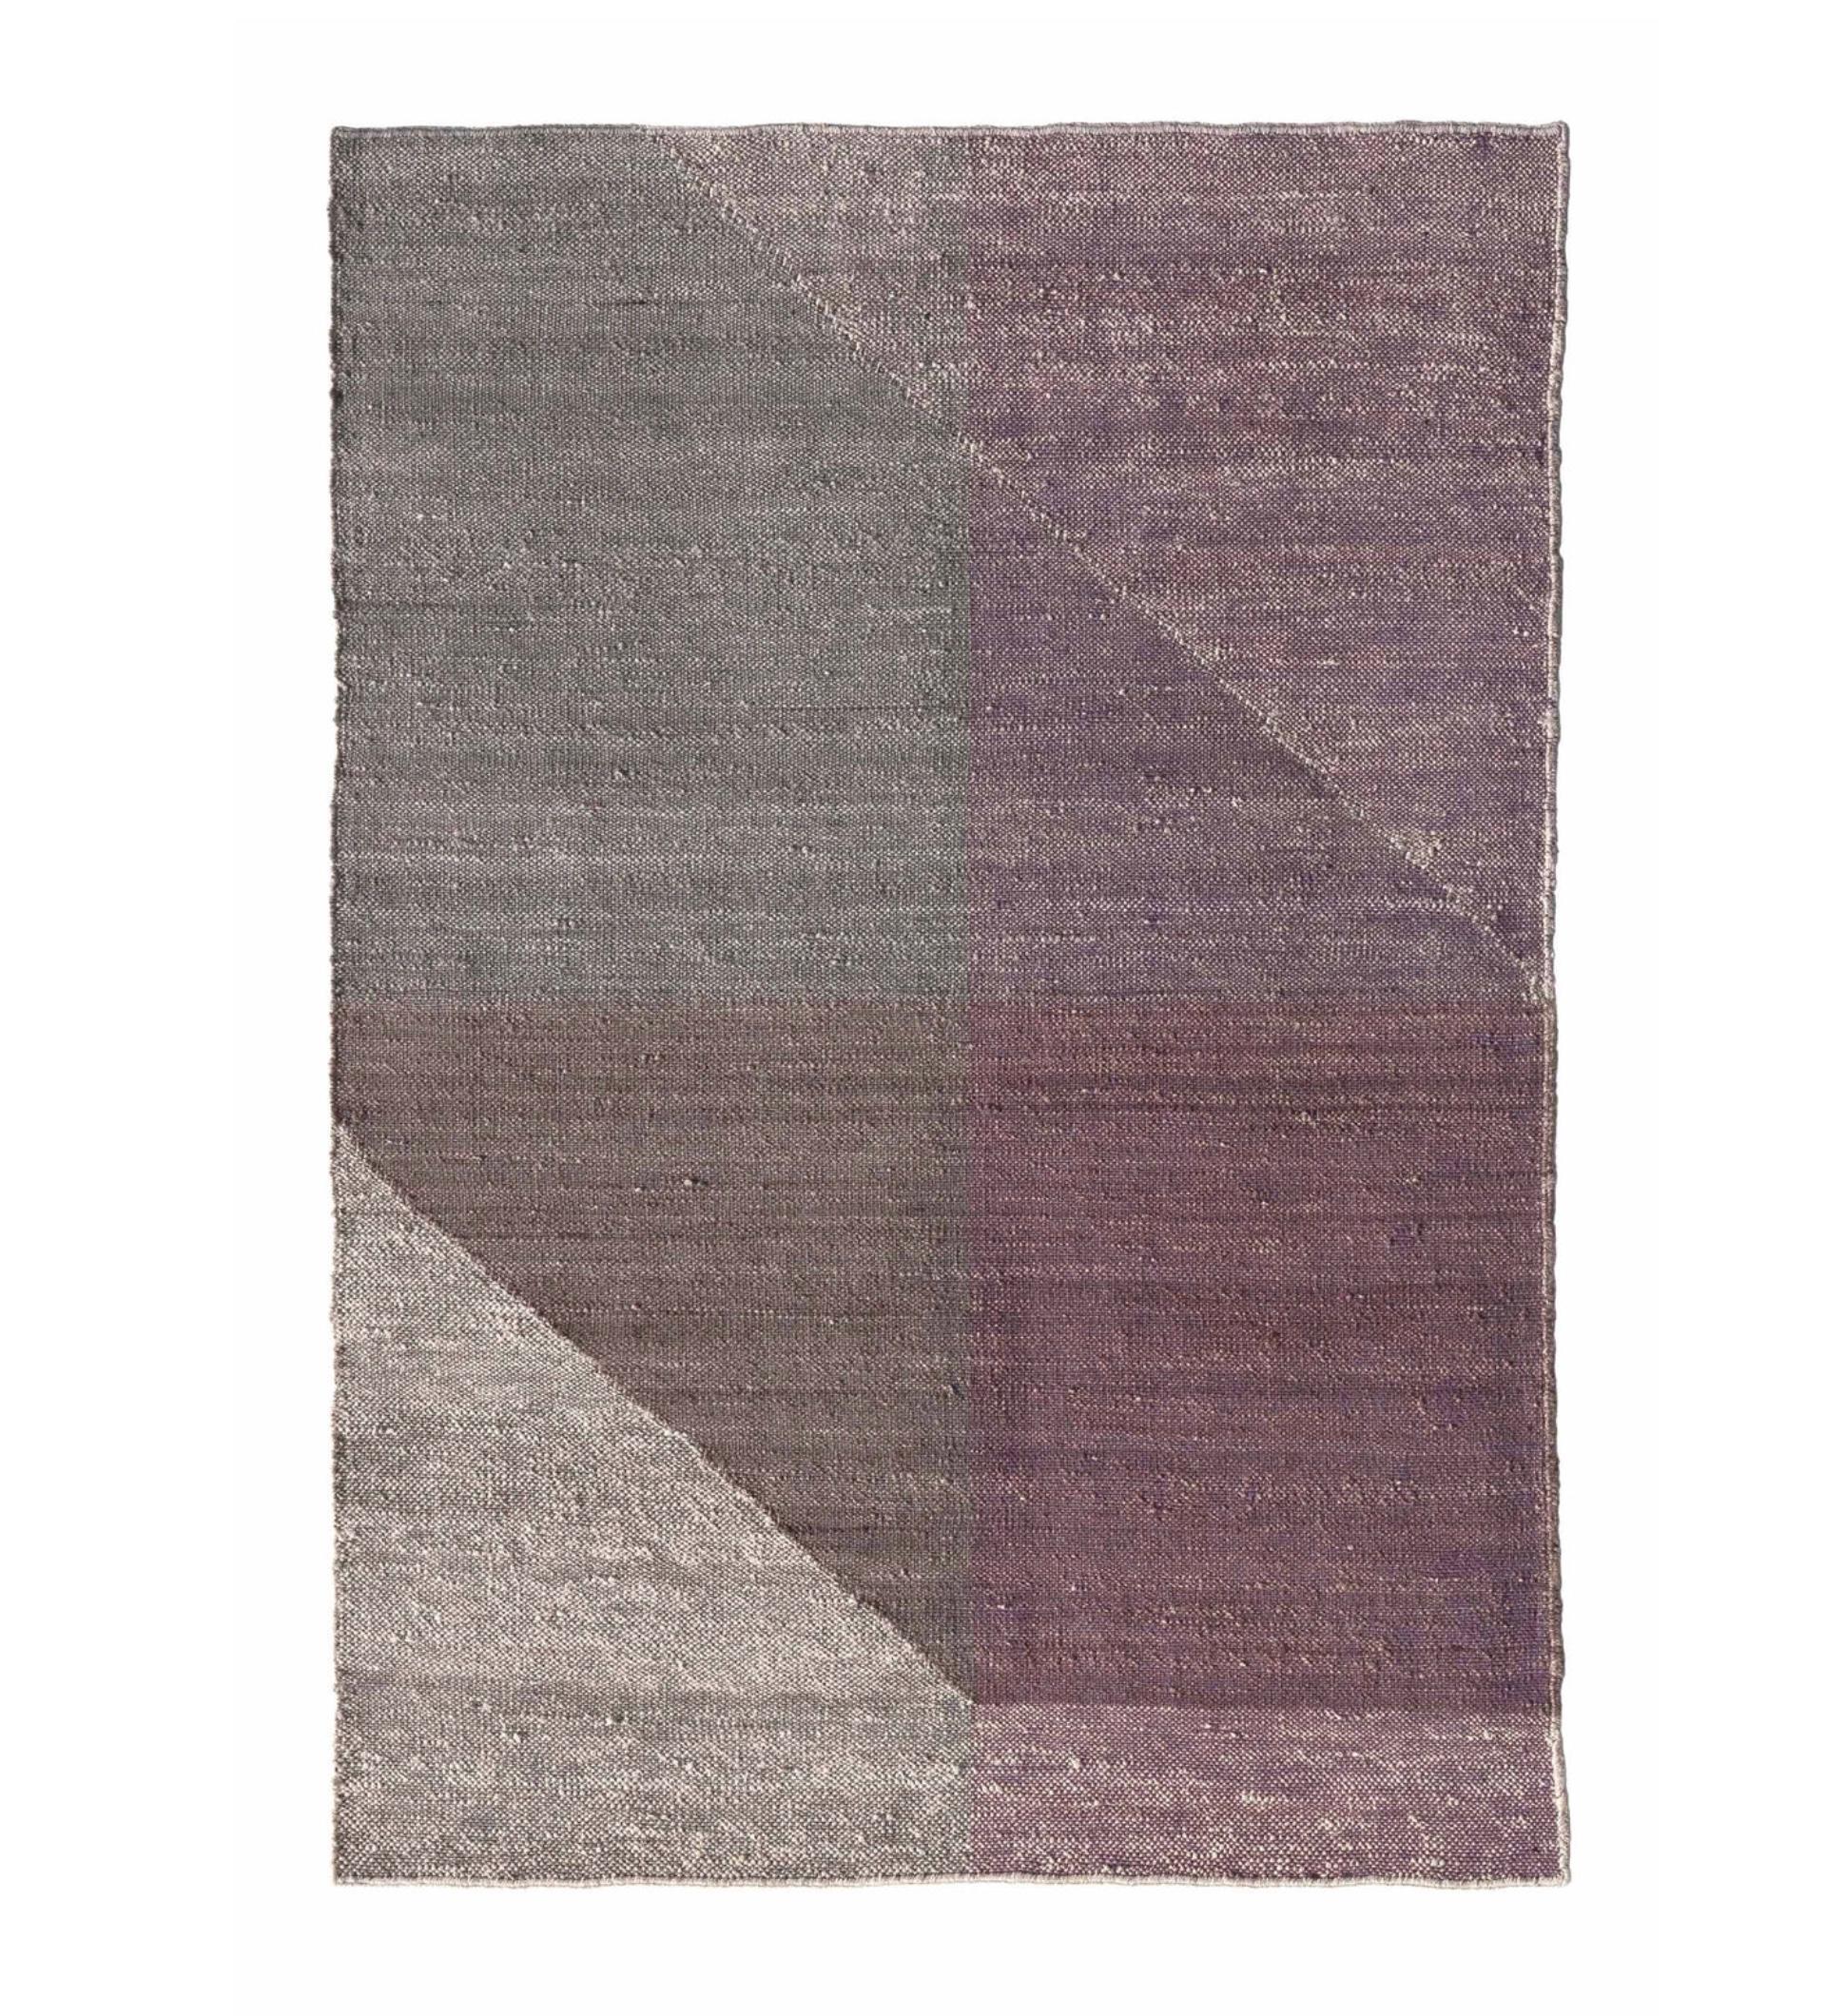 Mathias Hahn 'Capas 4' Kilim Rug for Nanimarquina. Current production, Spain.

By using layers, Mathias Han manages to create a variety of tonalities, textures and shades. This is a light and informal rug, hand-woven using the ancestral Kilim